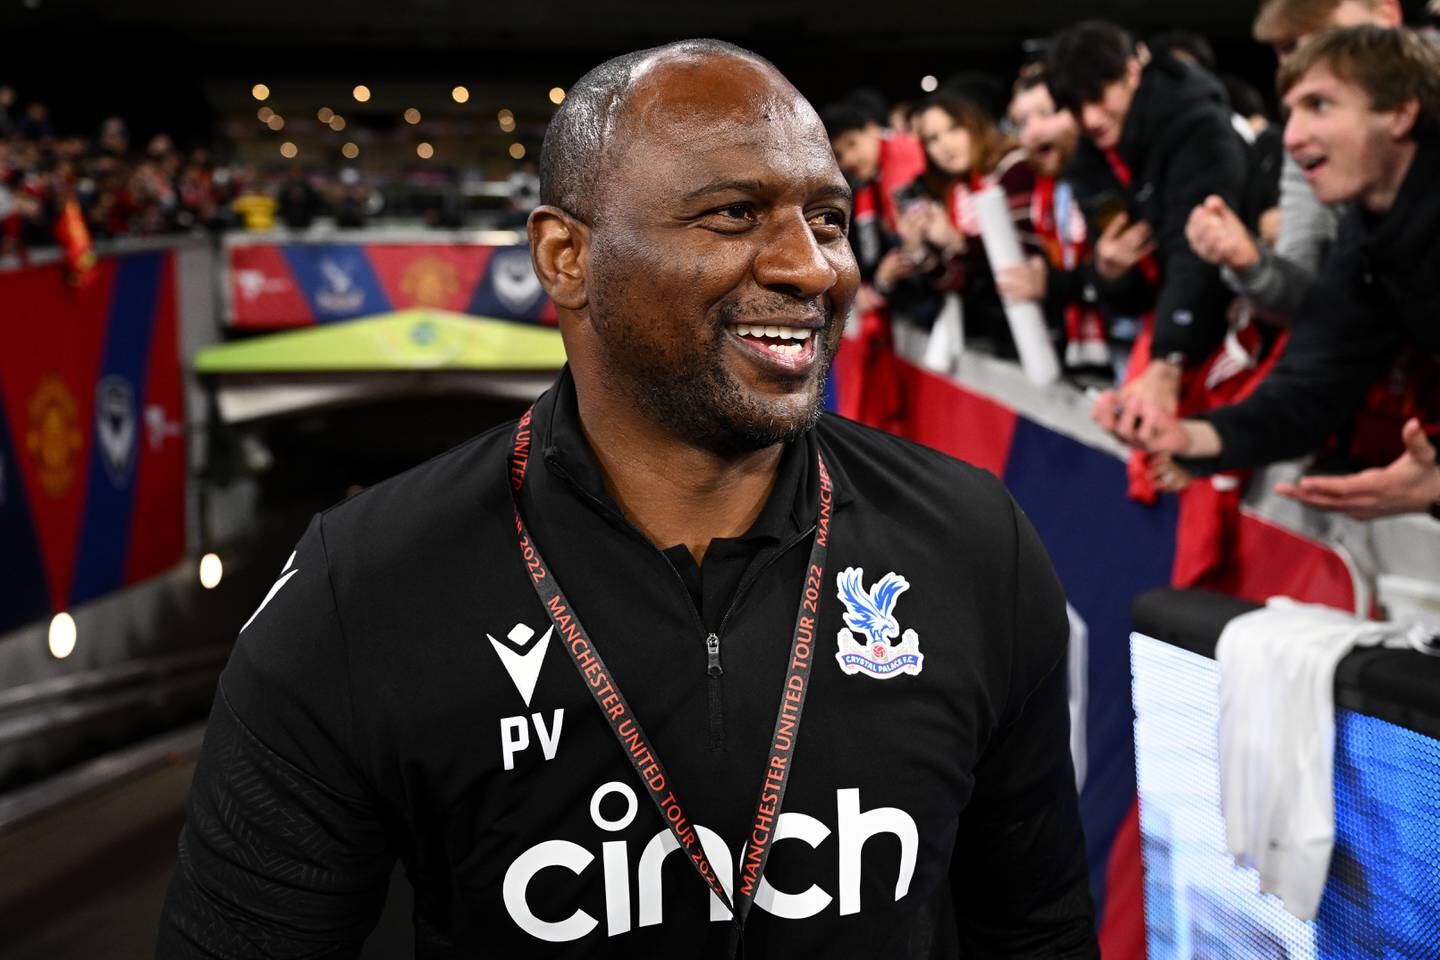 Crystal Palace manager Patrick Vieira is all smiles before the game in Melbourne on Tuesday. EPA